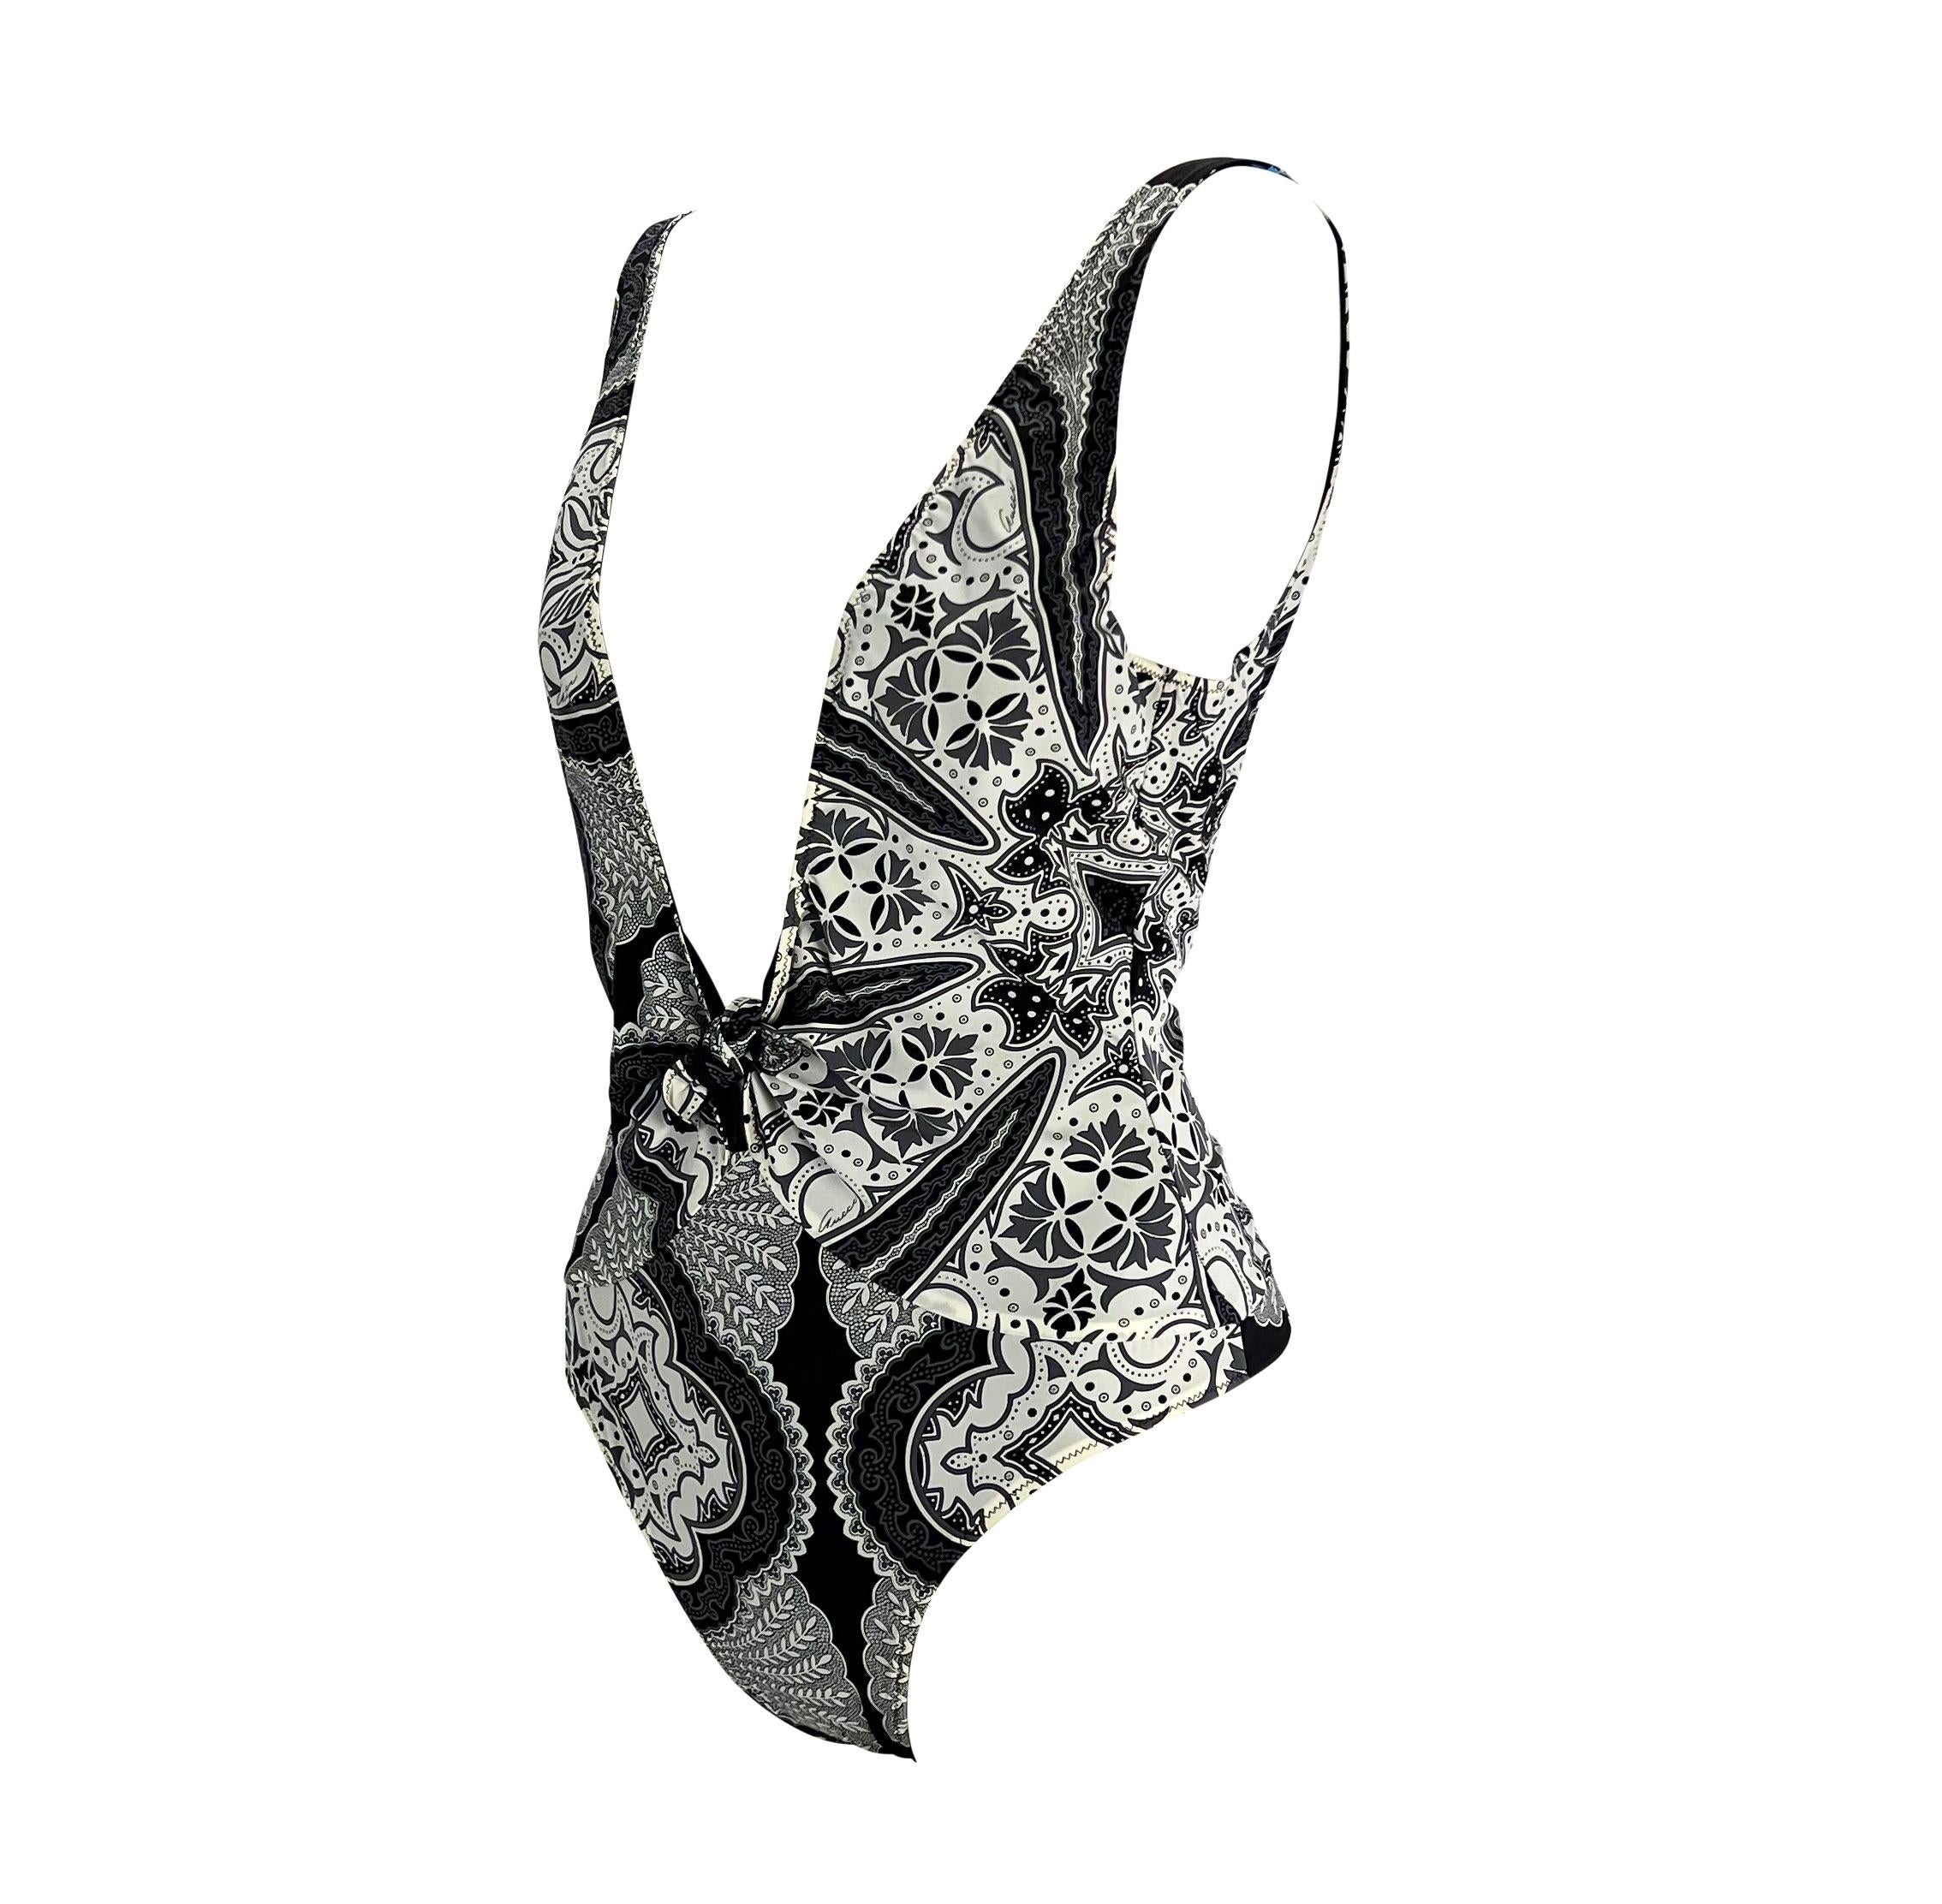 Presenting a black bandana print one piece thong Gucci swimsuit, designed by Tom Ford. From the 2004 cruise collection, this ultra sexy one piece features a plunging neckline with a small bow as well as a low exposed back. This piece in Tom Ford's